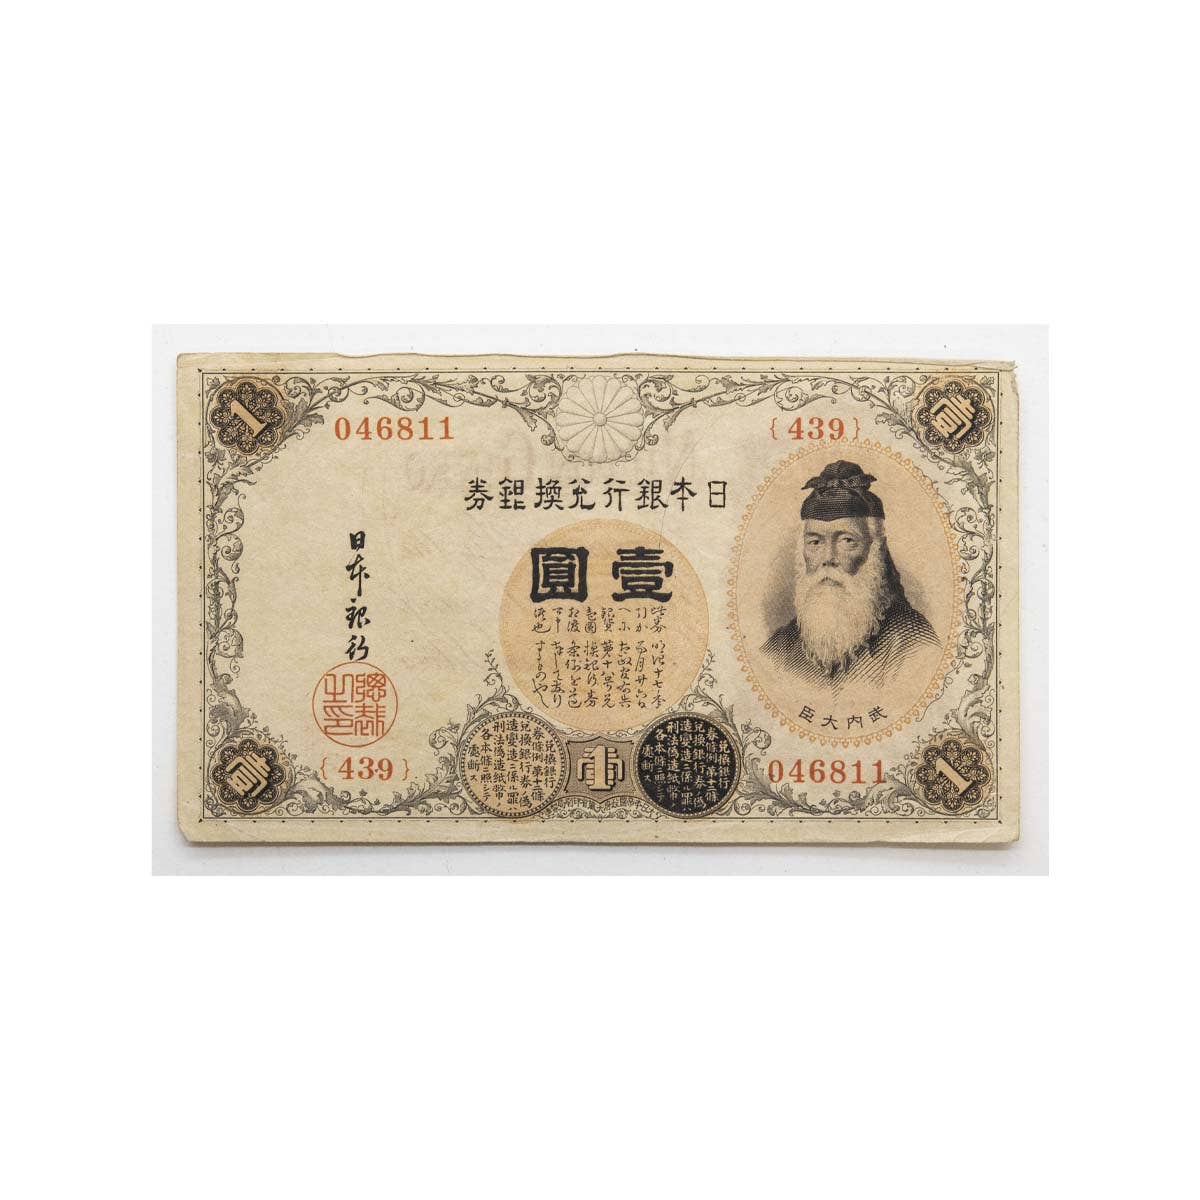 Japan No Date (1916) 1 Yen Silver Certificate Banknote Very Fine-Extremely Fine